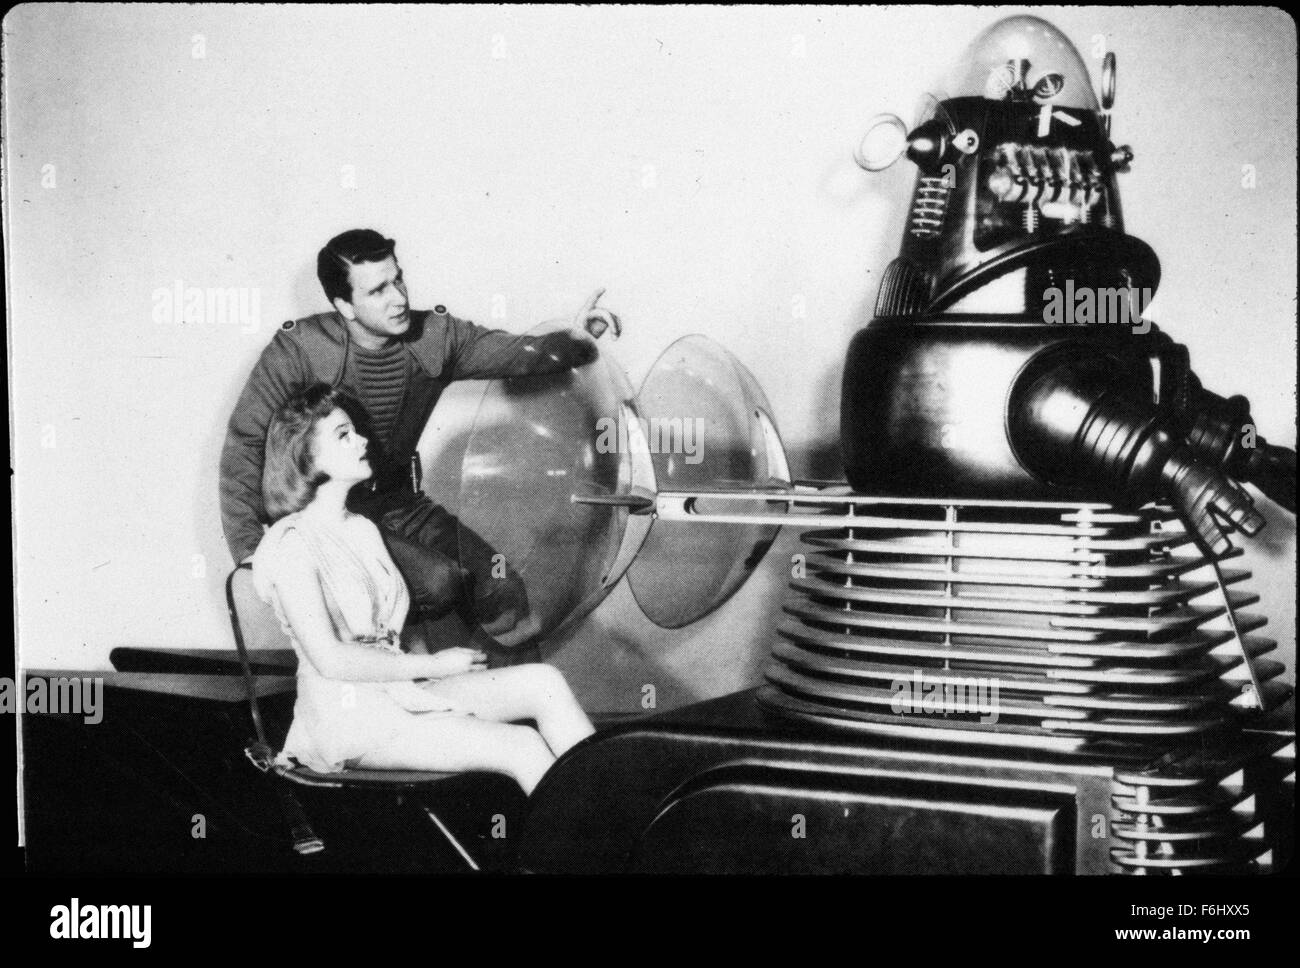 1956, Film Title: FORBIDDEN PLANET, Director: FRED McLEOD WILCOX, Studio: MGM, Pictured: ANNE FRANCIS, LESLIE NIELSEN, ROBBY THE ROBOT, ROBOTS-ANDROIDS-CYBORGS-CLONES, SCI-FI, SPACE EXPLORATION, ROBOT, ALIEN, FRIENDLY, GOOD, POINTING, LEARNING, EDUCATION, EXPLAINING, SHOWING, THE TEMPEST. (Credit Image: SNAP) Stock Photo